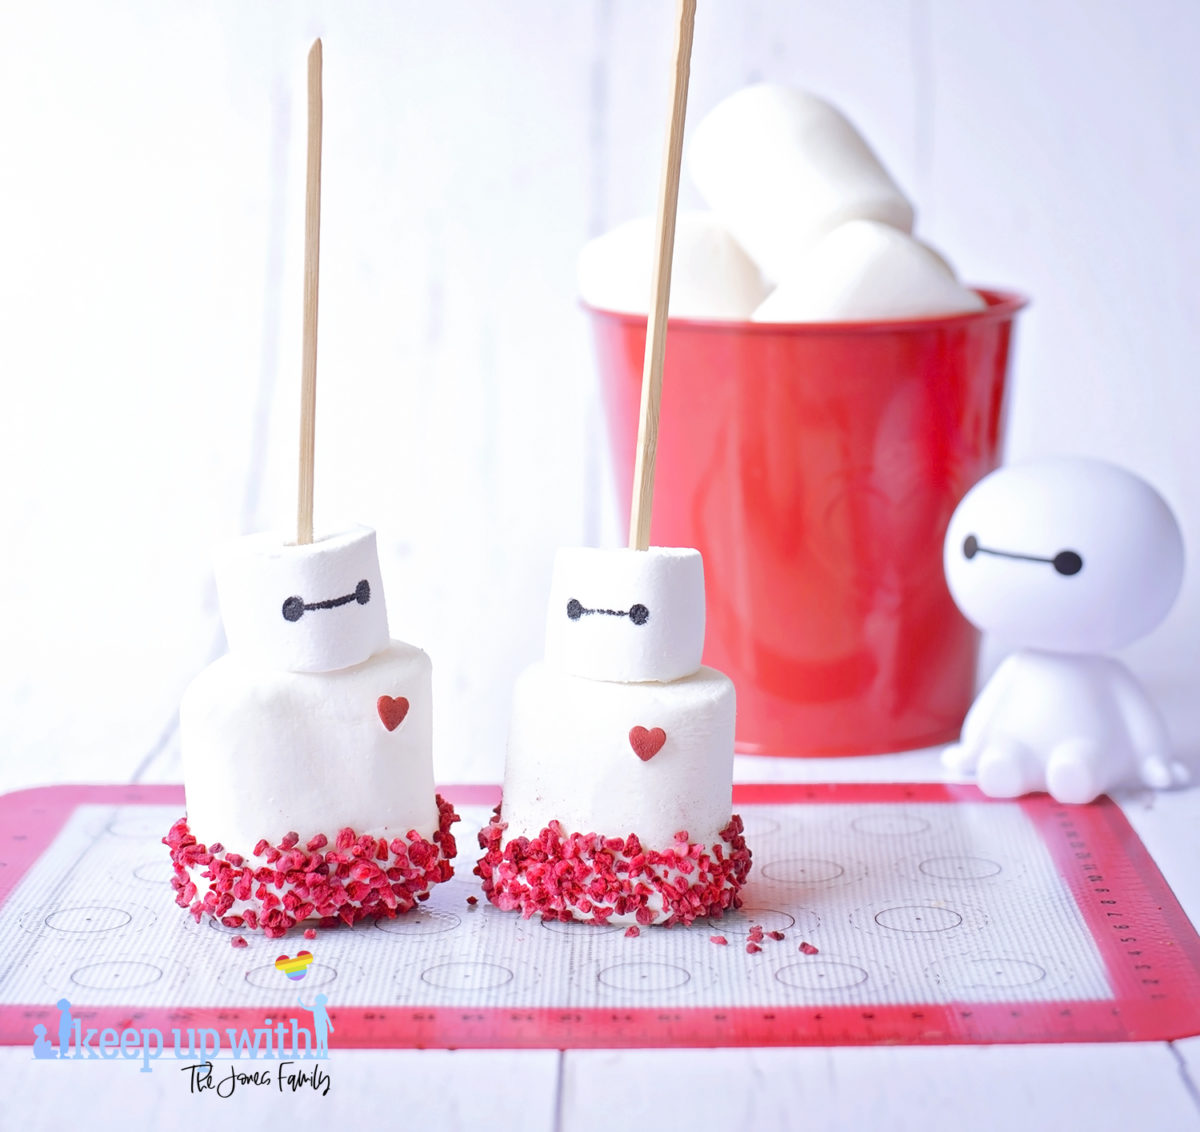 Image shows a plastic Baymax figure from Disney Pixar's Big Hero 6 sat on a white tabletop. In front of him are two fruity baymas marshmallow pops sat on a silicone baking mat. In the background is a red tin bucket of large marshmallows. Image by Keep Up With The Jones Family.